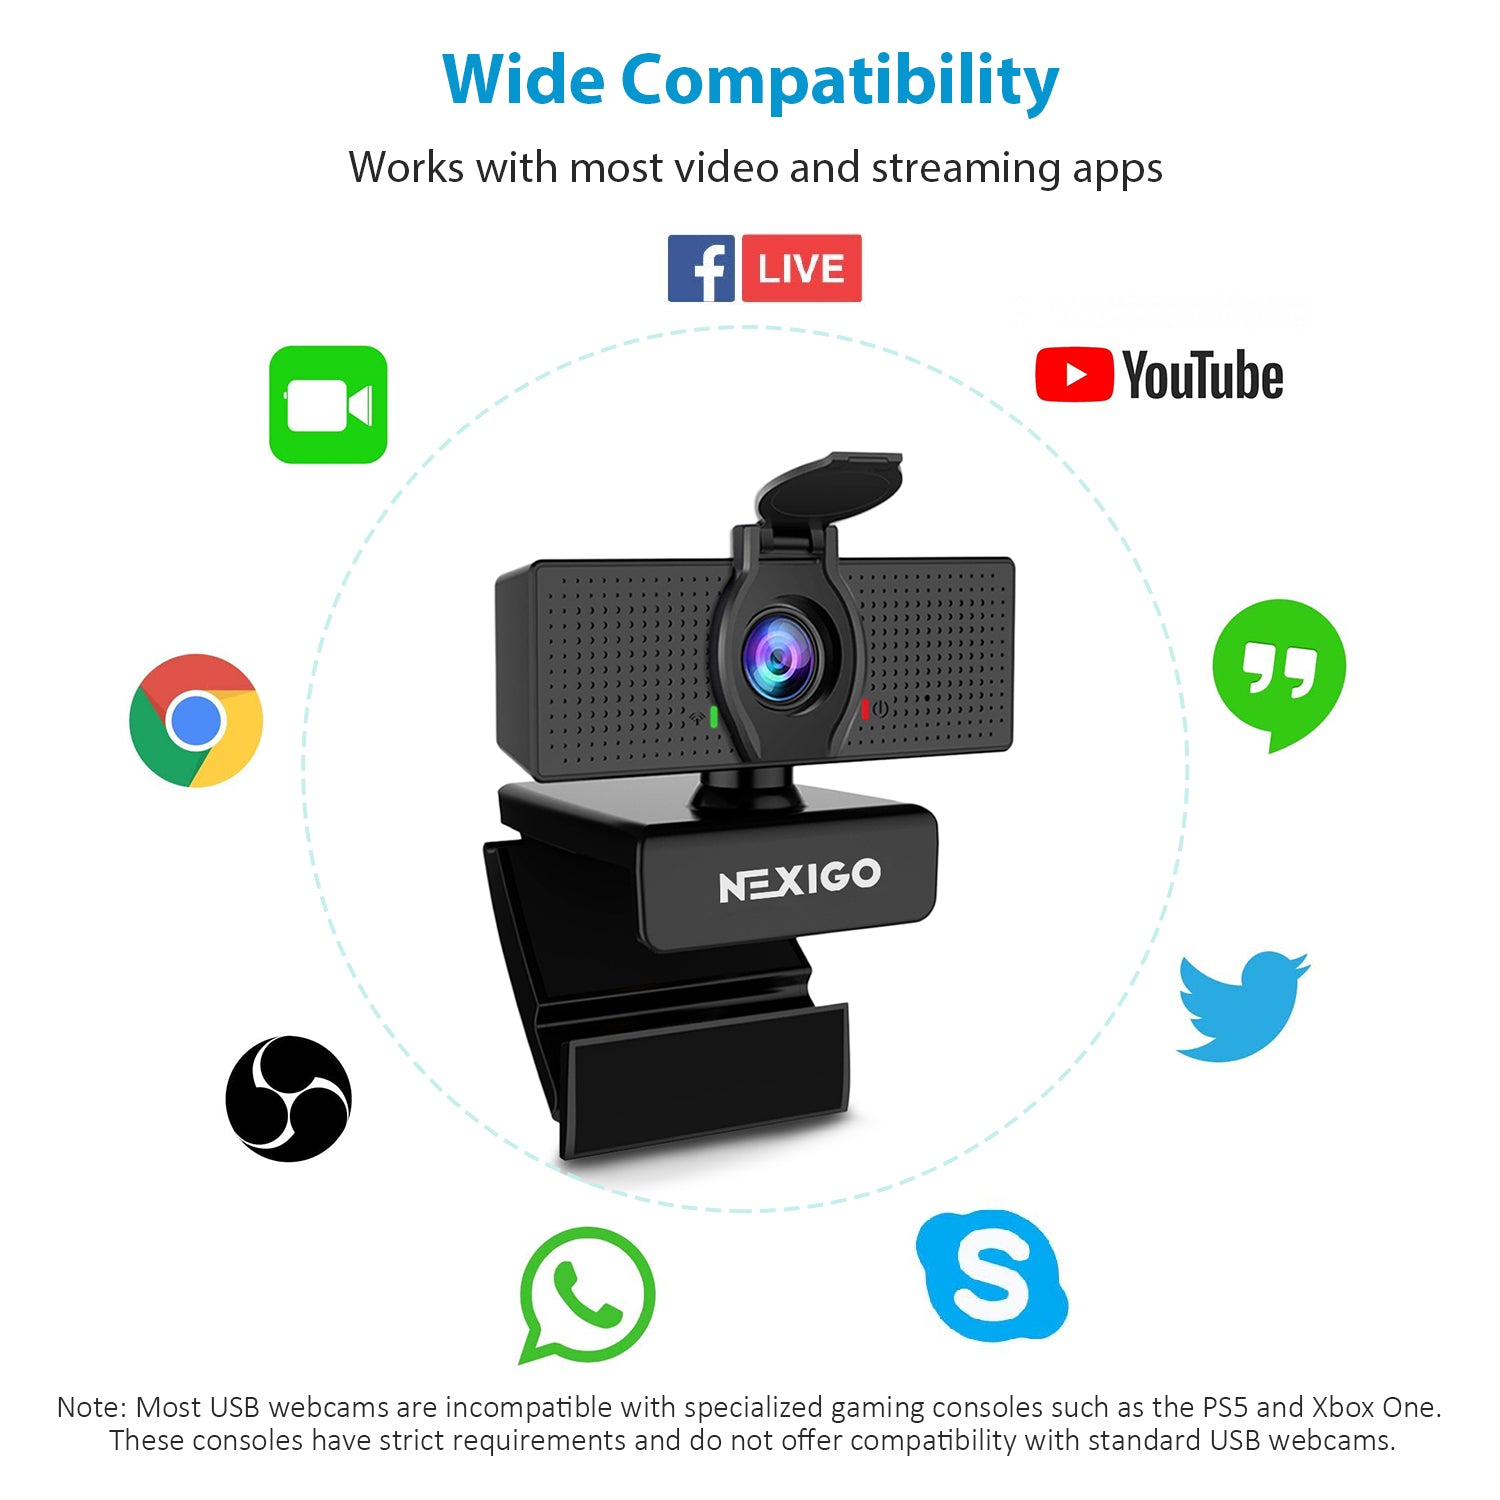 The camera is widely compatible with multiple video and live streaming software.